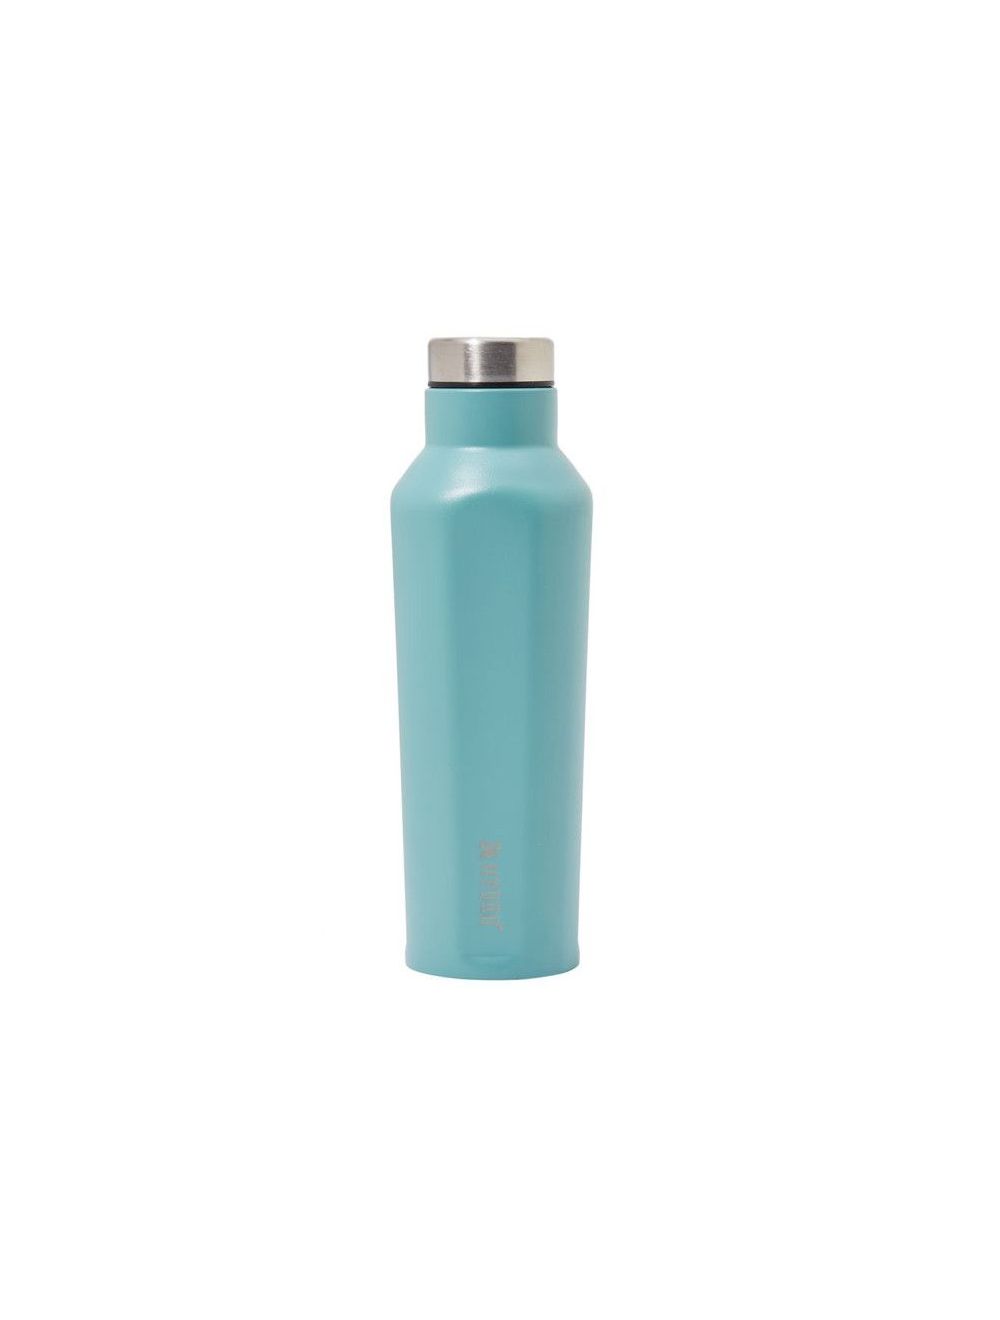 Neoflam Hydro Tumbler, Water, Hydration Bottle, 500 ml, Marble Green